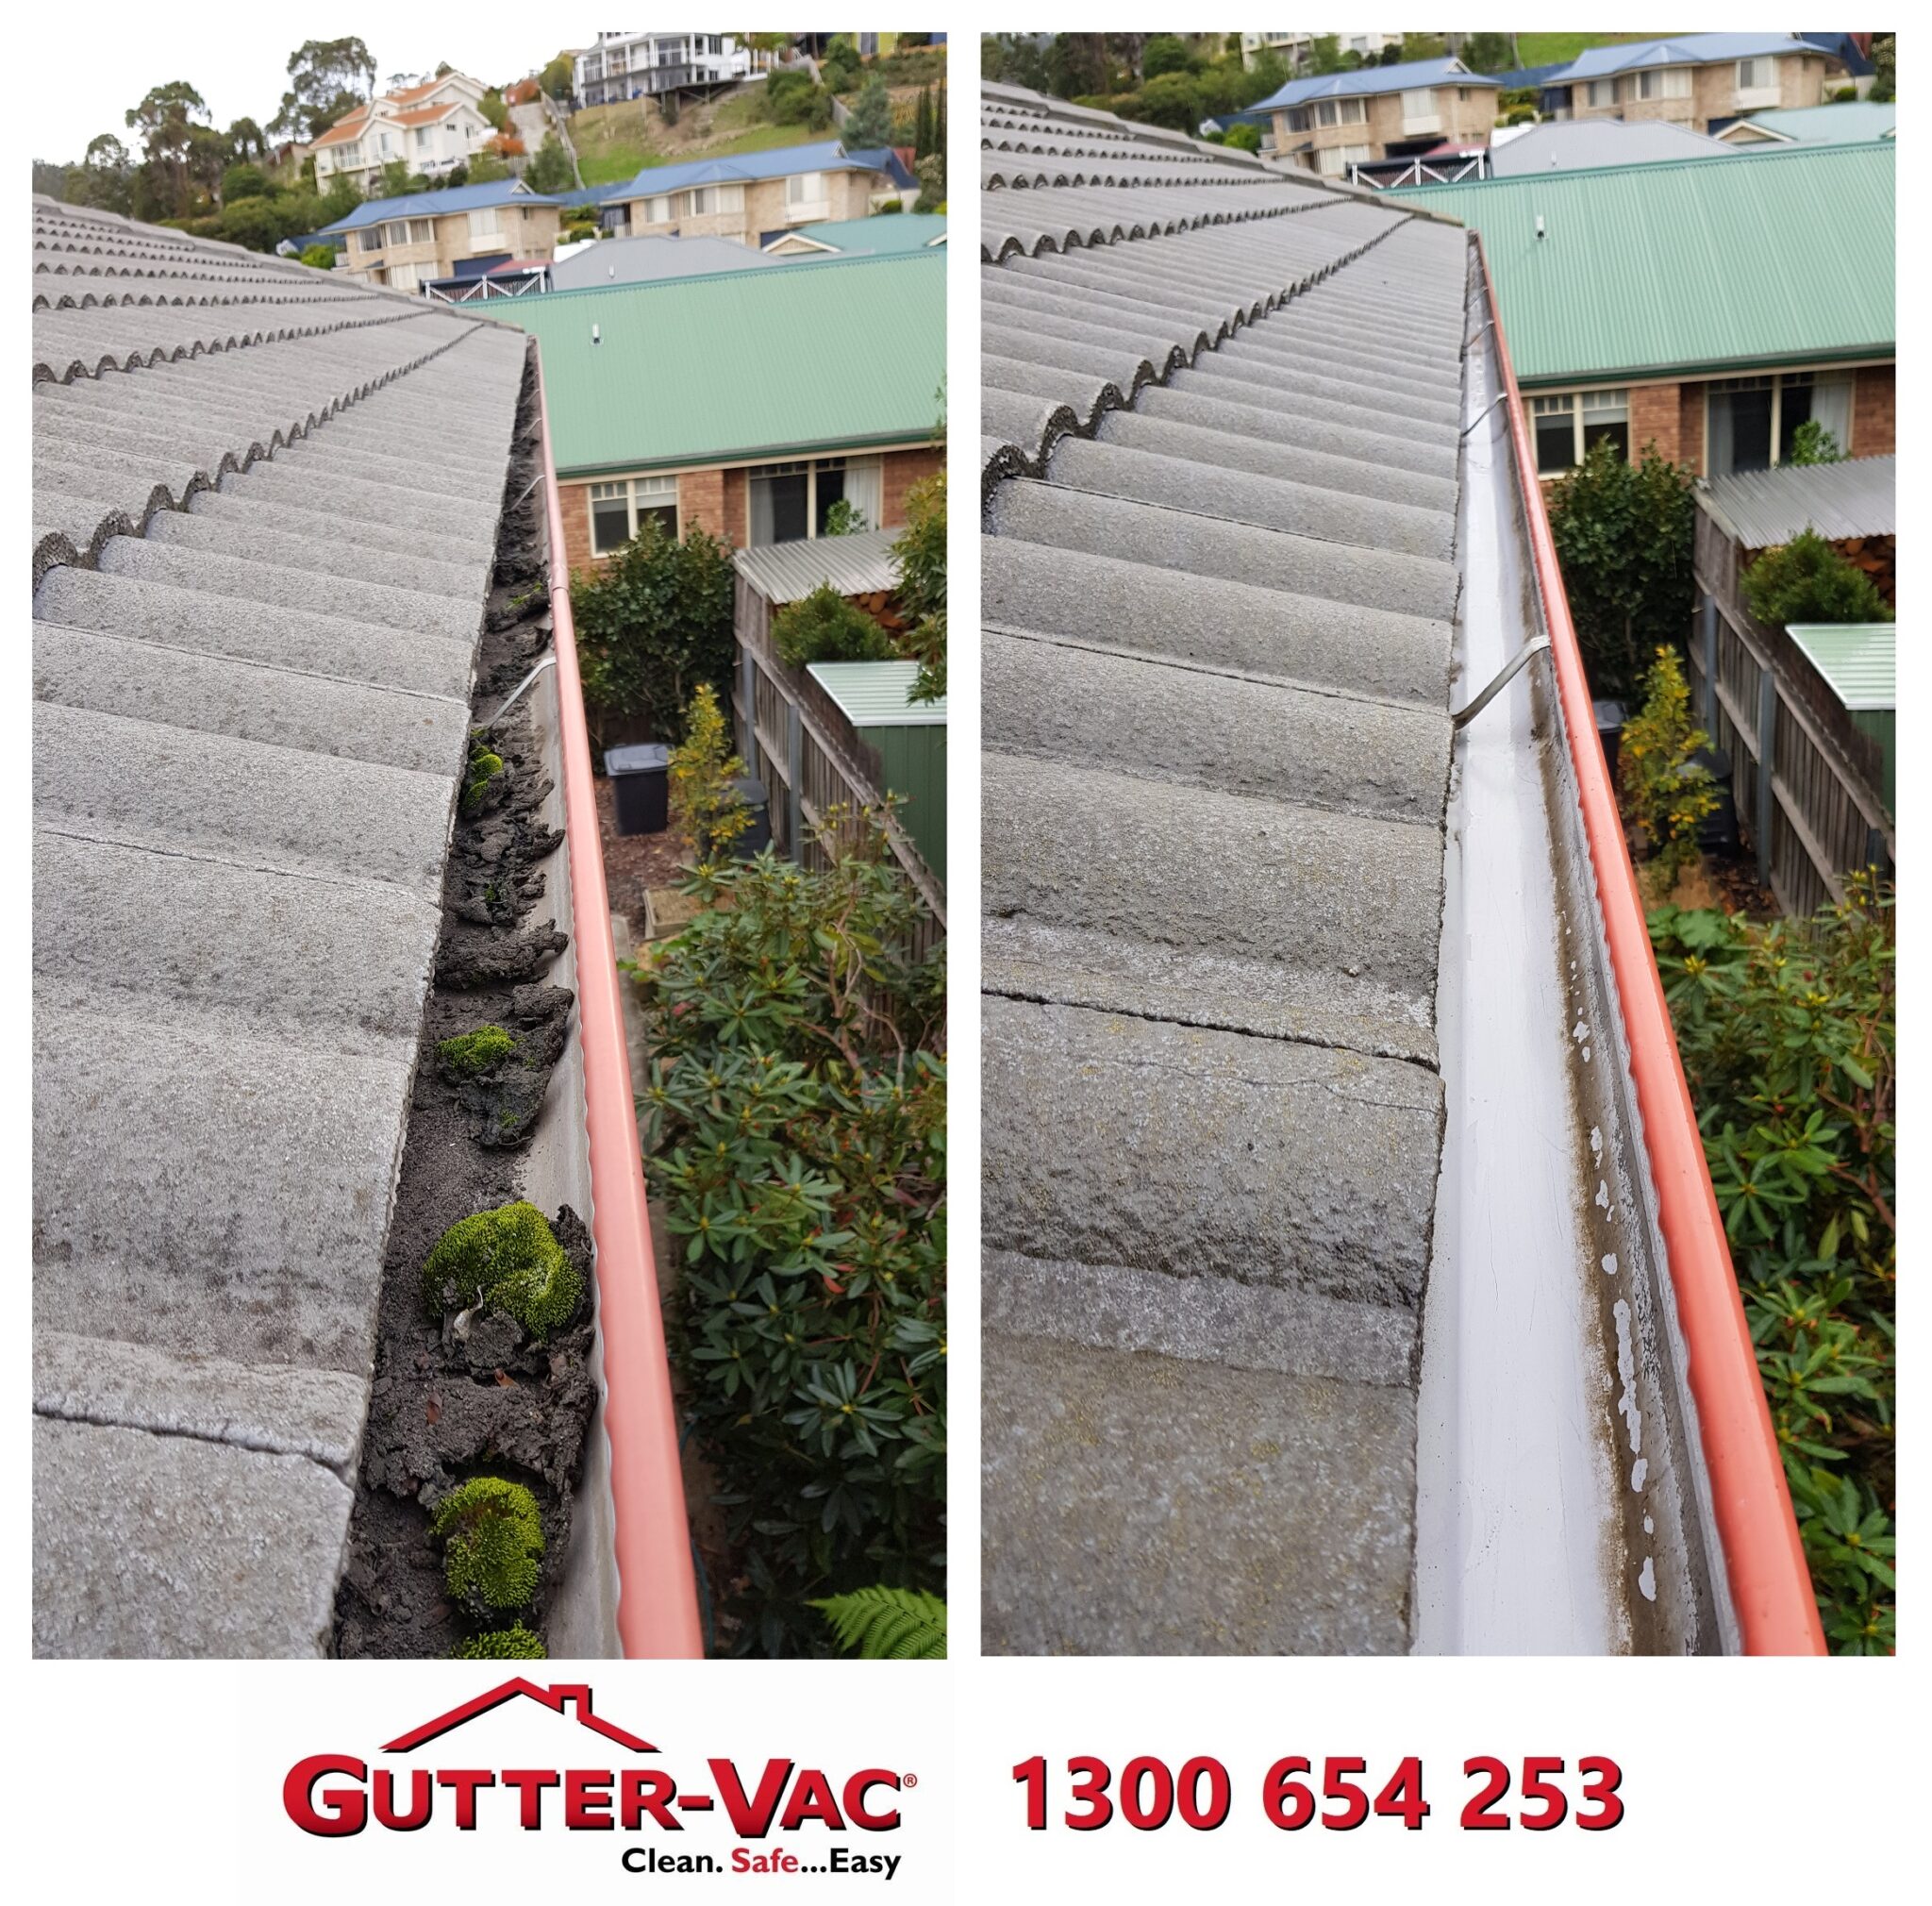 Do You Know the Signs of Blocked Gutters and Downpipes?